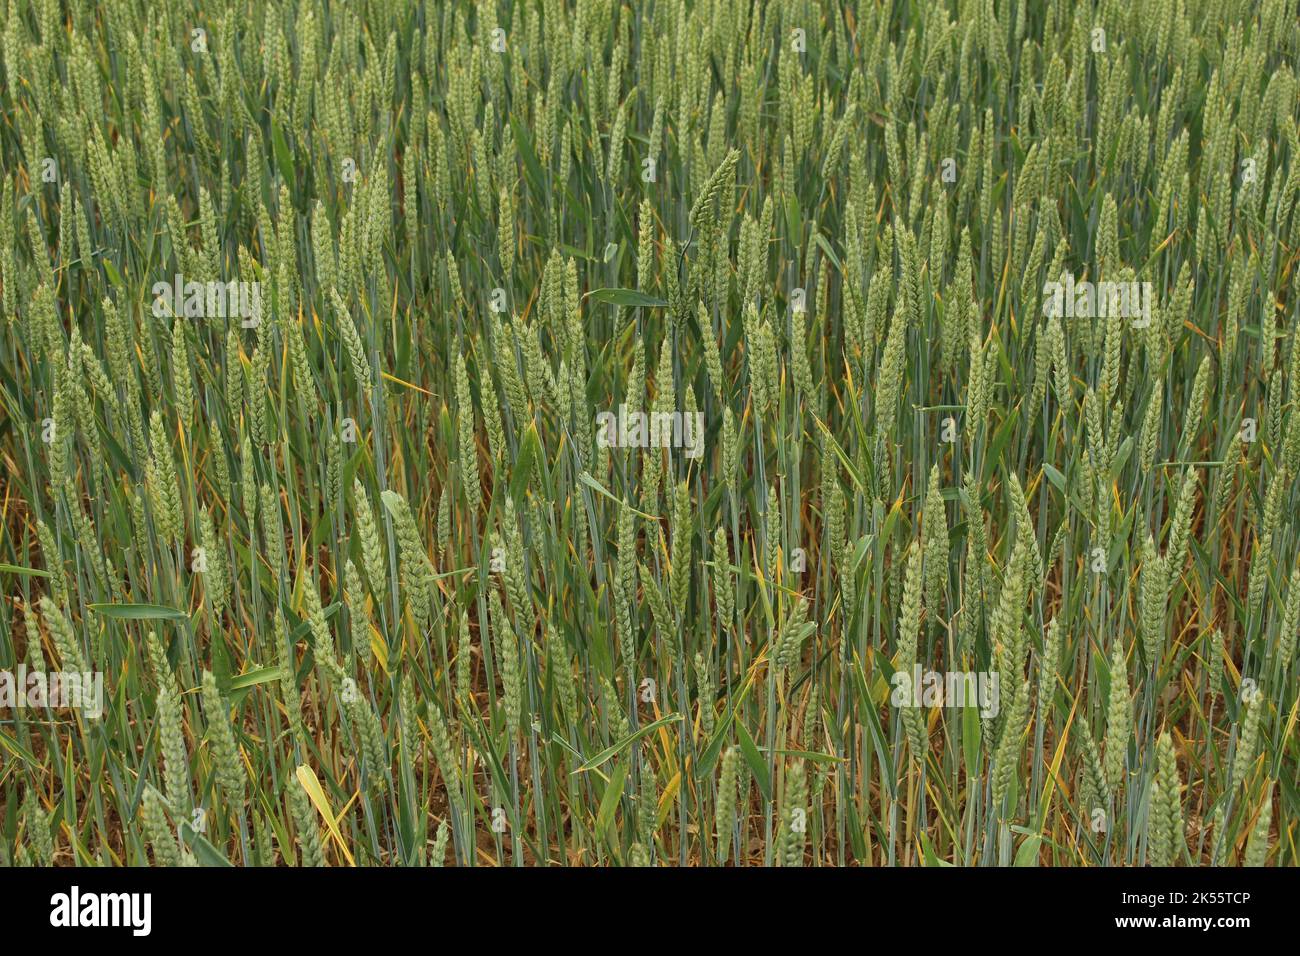 Close up green wheat field texture. Field of young, newly planted green cereals. Concept for food security, harvest, farming, planting, hunger crisis Stock Photo